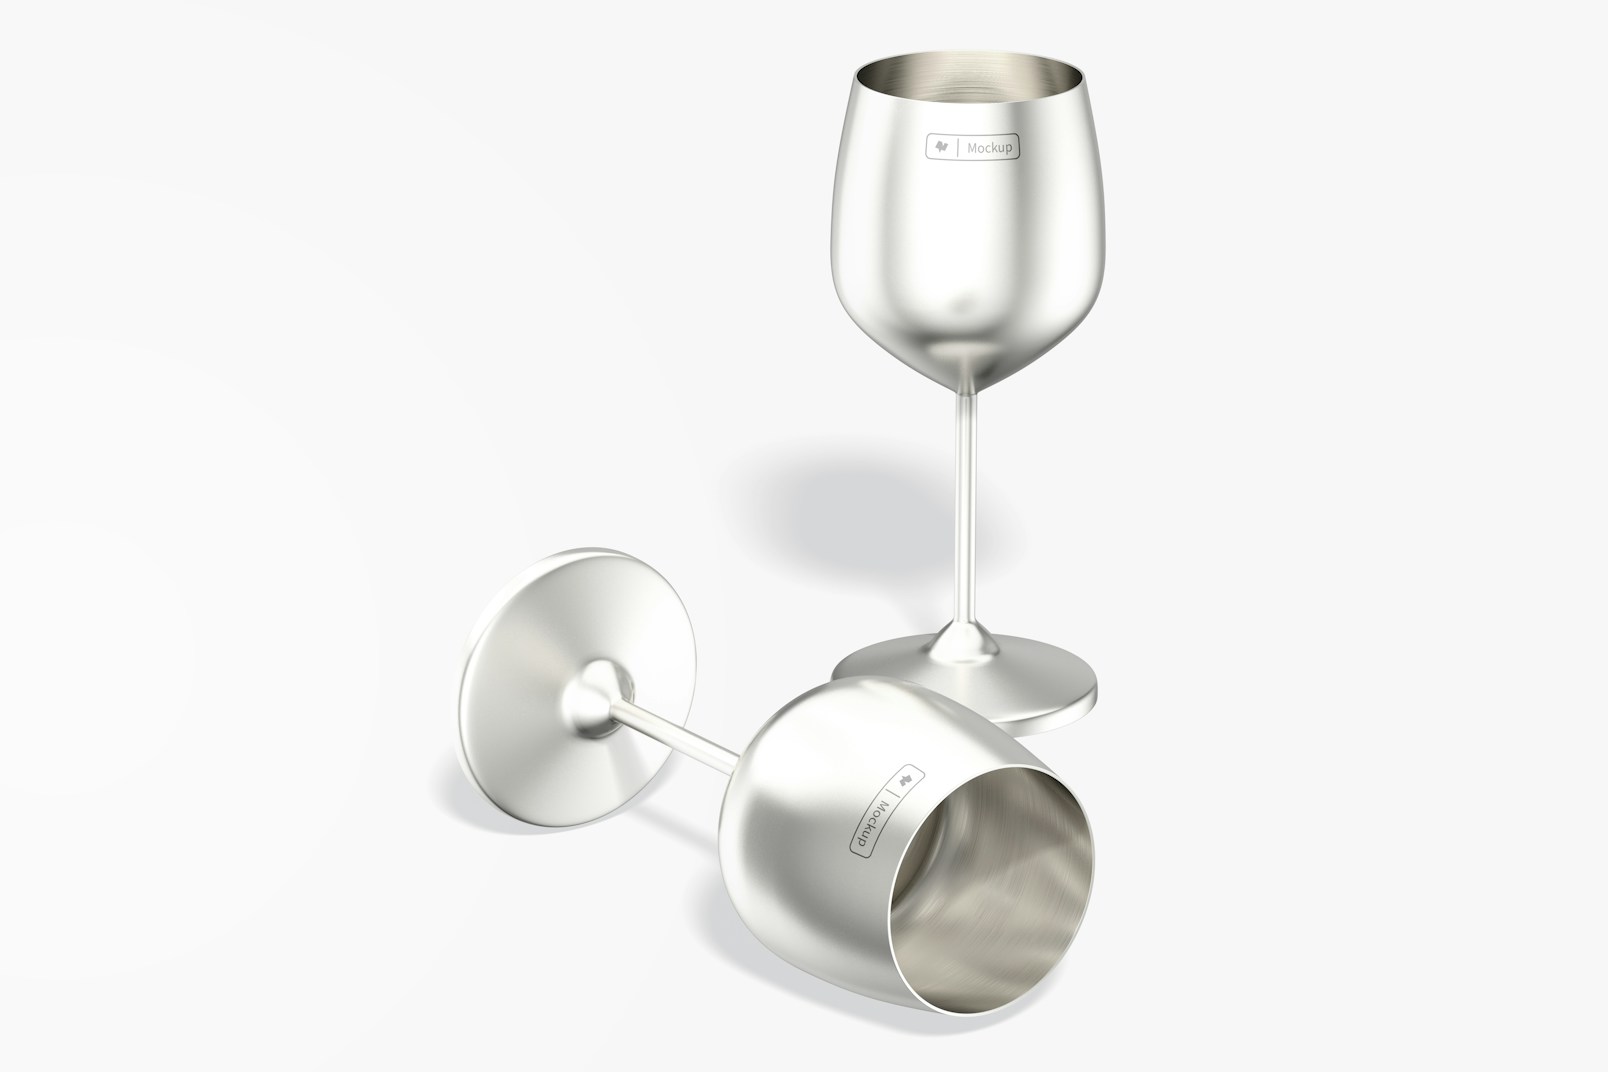 Stainless Steel Wine Glasses Mockup, Dropped